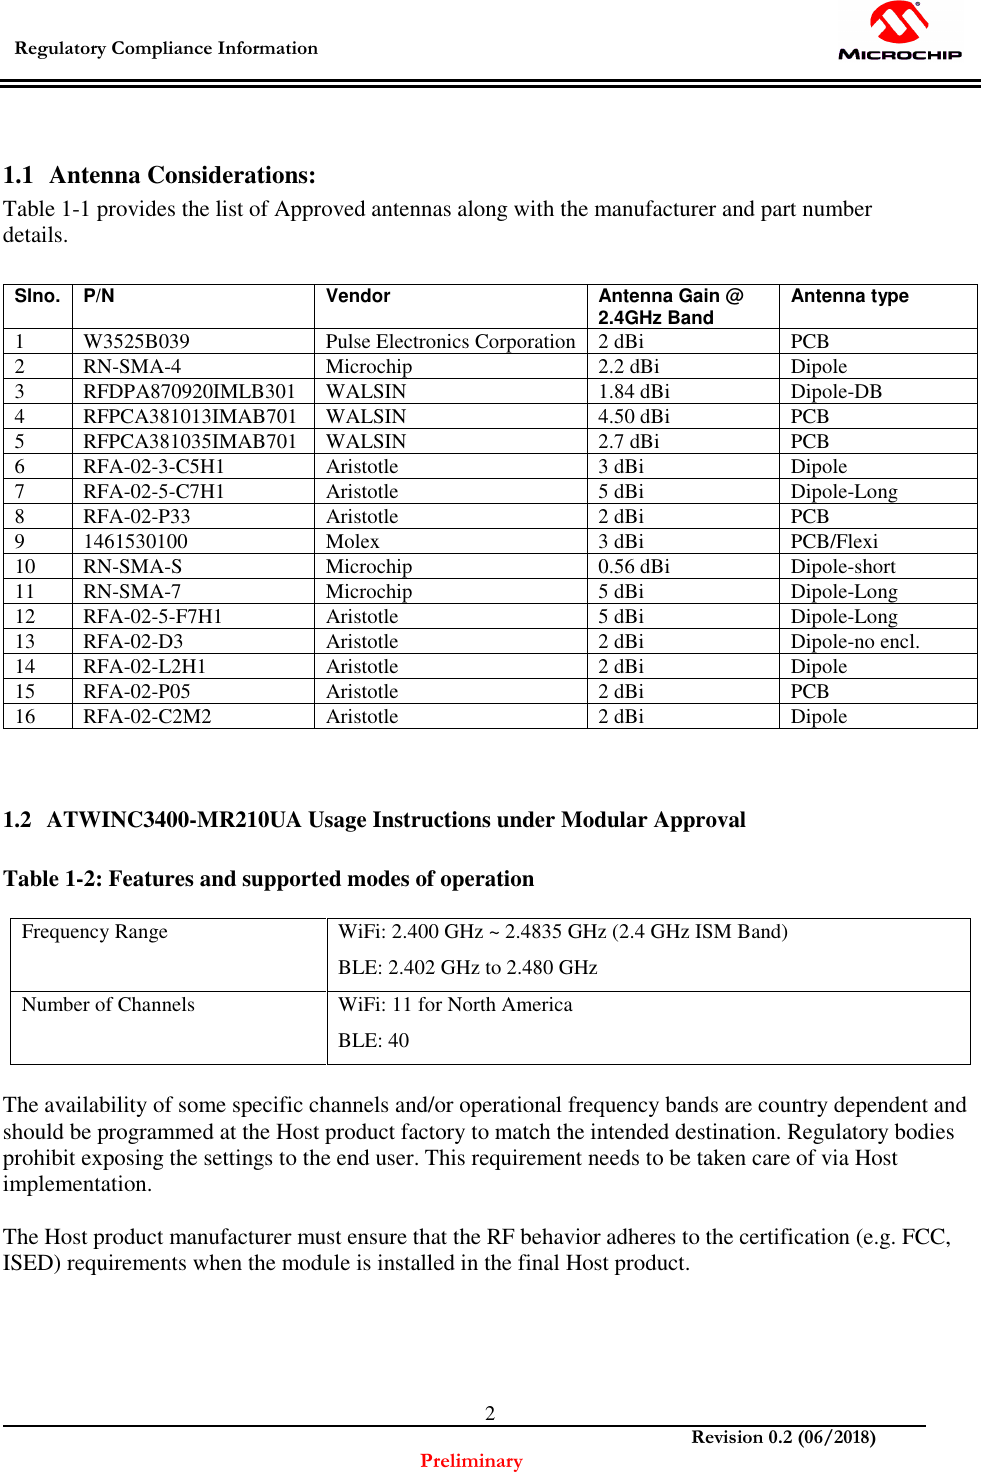  Regulatory Compliance Information    Revision 0.2 (06/2018) Preliminary  2 1.1 Antenna Considerations: Table 1-1 provides the list of Approved antennas along with the manufacturer and part number details.  Slno.  P/N  Vendor  Antenna Gain @ 2.4GHz Band Antenna type 1 W3525B039 Pulse Electronics Corporation 2 dBi PCB 2 RN-SMA-4 Microchip 2.2 dBi Dipole 3 RFDPA870920IMLB301 WALSIN 1.84 dBi Dipole-DB 4 RFPCA381013IMAB701 WALSIN 4.50 dBi PCB 5 RFPCA381035IMAB701 WALSIN 2.7 dBi PCB 6 RFA-02-3-C5H1 Aristotle 3 dBi Dipole 7 RFA-02-5-C7H1 Aristotle 5 dBi  Dipole-Long 8 RFA-02-P33 Aristotle 2 dBi PCB 9 1461530100 Molex 3 dBi PCB/Flexi 10 RN-SMA-S Microchip 0.56 dBi Dipole-short 11 RN-SMA-7 Microchip 5 dBi Dipole-Long 12 RFA-02-5-F7H1 Aristotle 5 dBi Dipole-Long 13 RFA-02-D3 Aristotle 2 dBi Dipole-no encl. 14 RFA-02-L2H1 Aristotle 2 dBi Dipole 15 RFA-02-P05 Aristotle 2 dBi PCB 16 RFA-02-C2M2 Aristotle 2 dBi Dipole    1.2 ATWINC3400-MR210UA Usage Instructions under Modular Approval  Table 1-2: Features and supported modes of operation  Frequency Range   WiFi: 2.400 GHz ~ 2.4835 GHz (2.4 GHz ISM Band) BLE: 2.402 GHz to 2.480 GHz Number of Channels  WiFi: 11 for North America BLE: 40  The availability of some specific channels and/or operational frequency bands are country dependent and should be programmed at the Host product factory to match the intended destination. Regulatory bodies prohibit exposing the settings to the end user. This requirement needs to be taken care of via Host implementation.  The Host product manufacturer must ensure that the RF behavior adheres to the certification (e.g. FCC, ISED) requirements when the module is installed in the final Host product.       